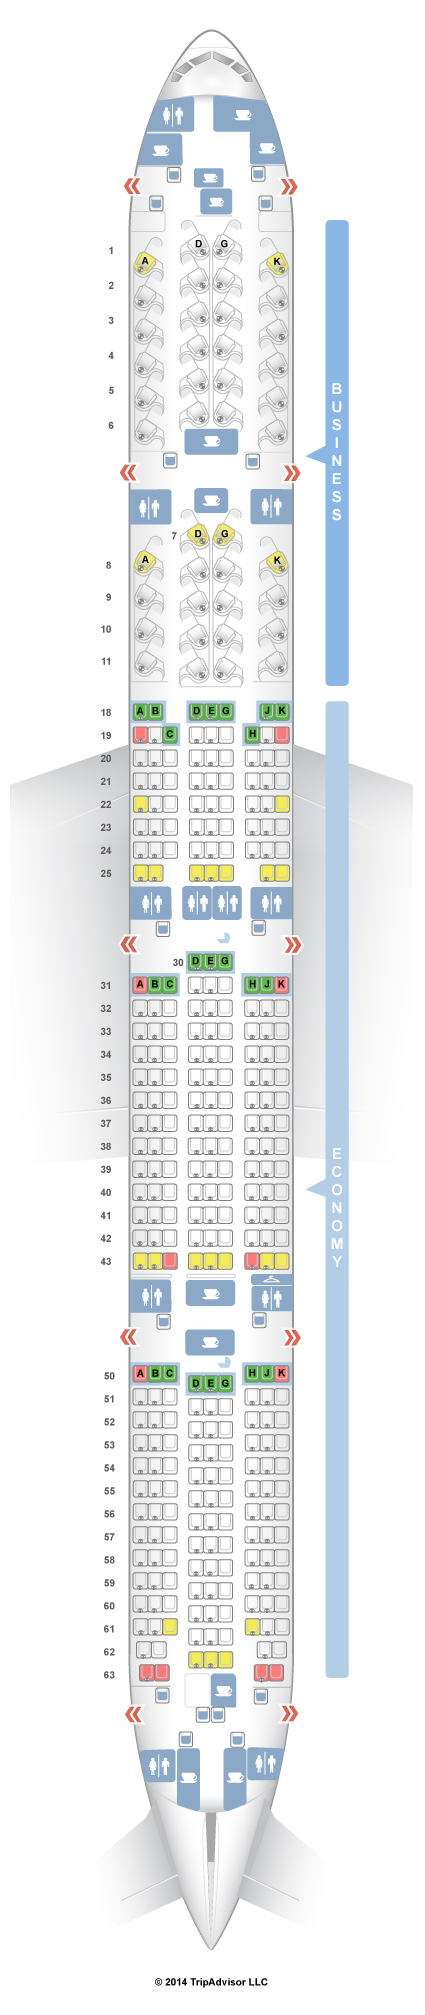 Boeing 777 Seating Chart Air Canada